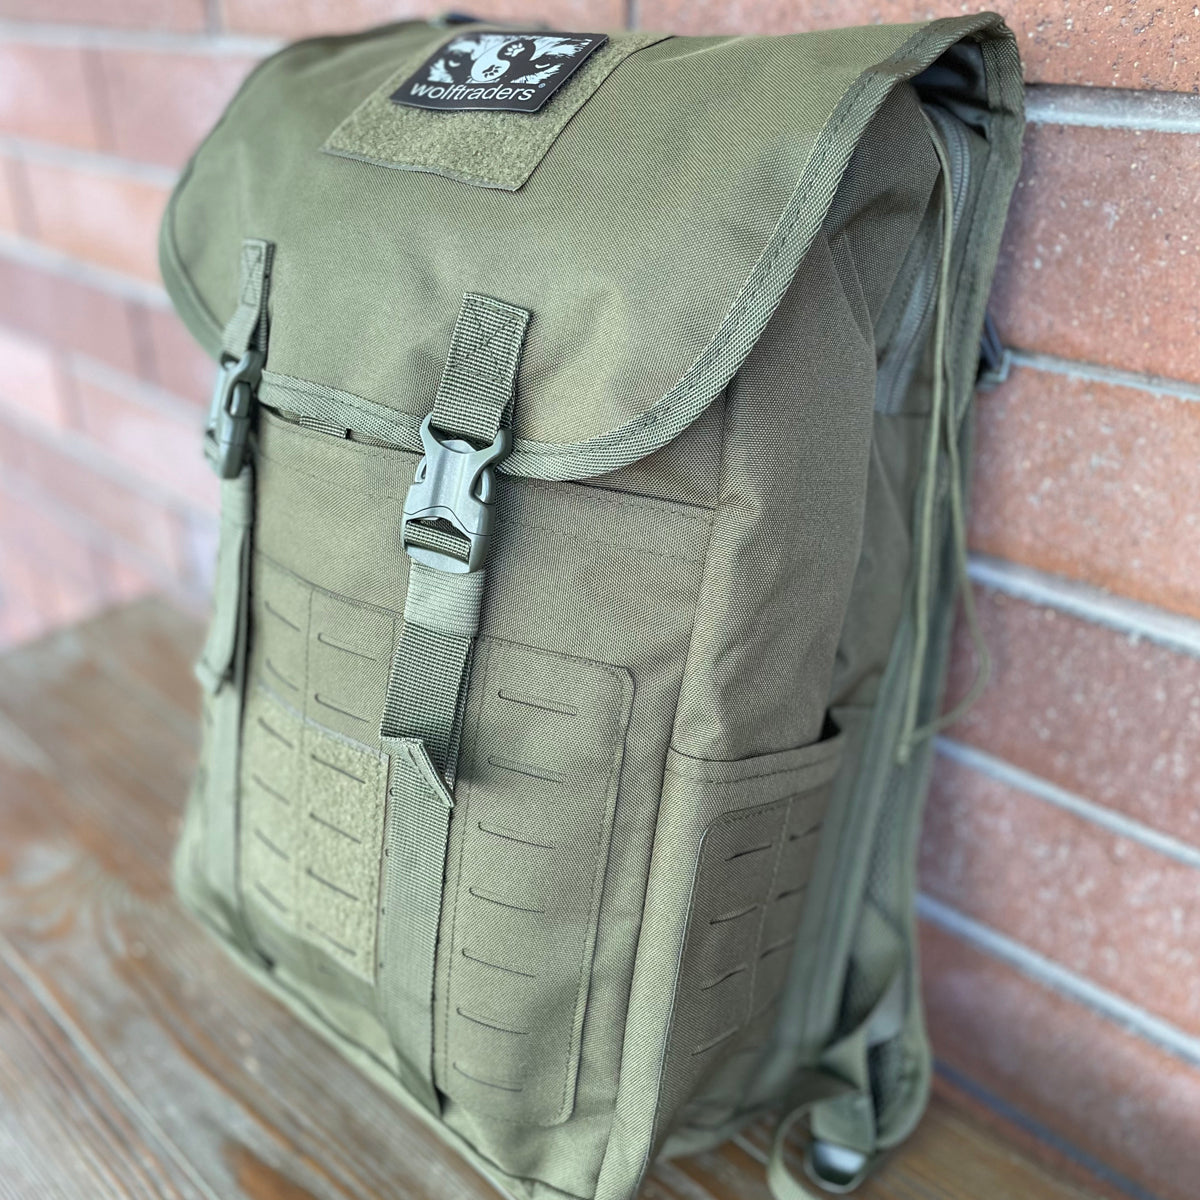 Wolftraders LoadedWolf multiOperational 40 Liter Tactical Backpack Olive Draft Green Side 2 molle and straps